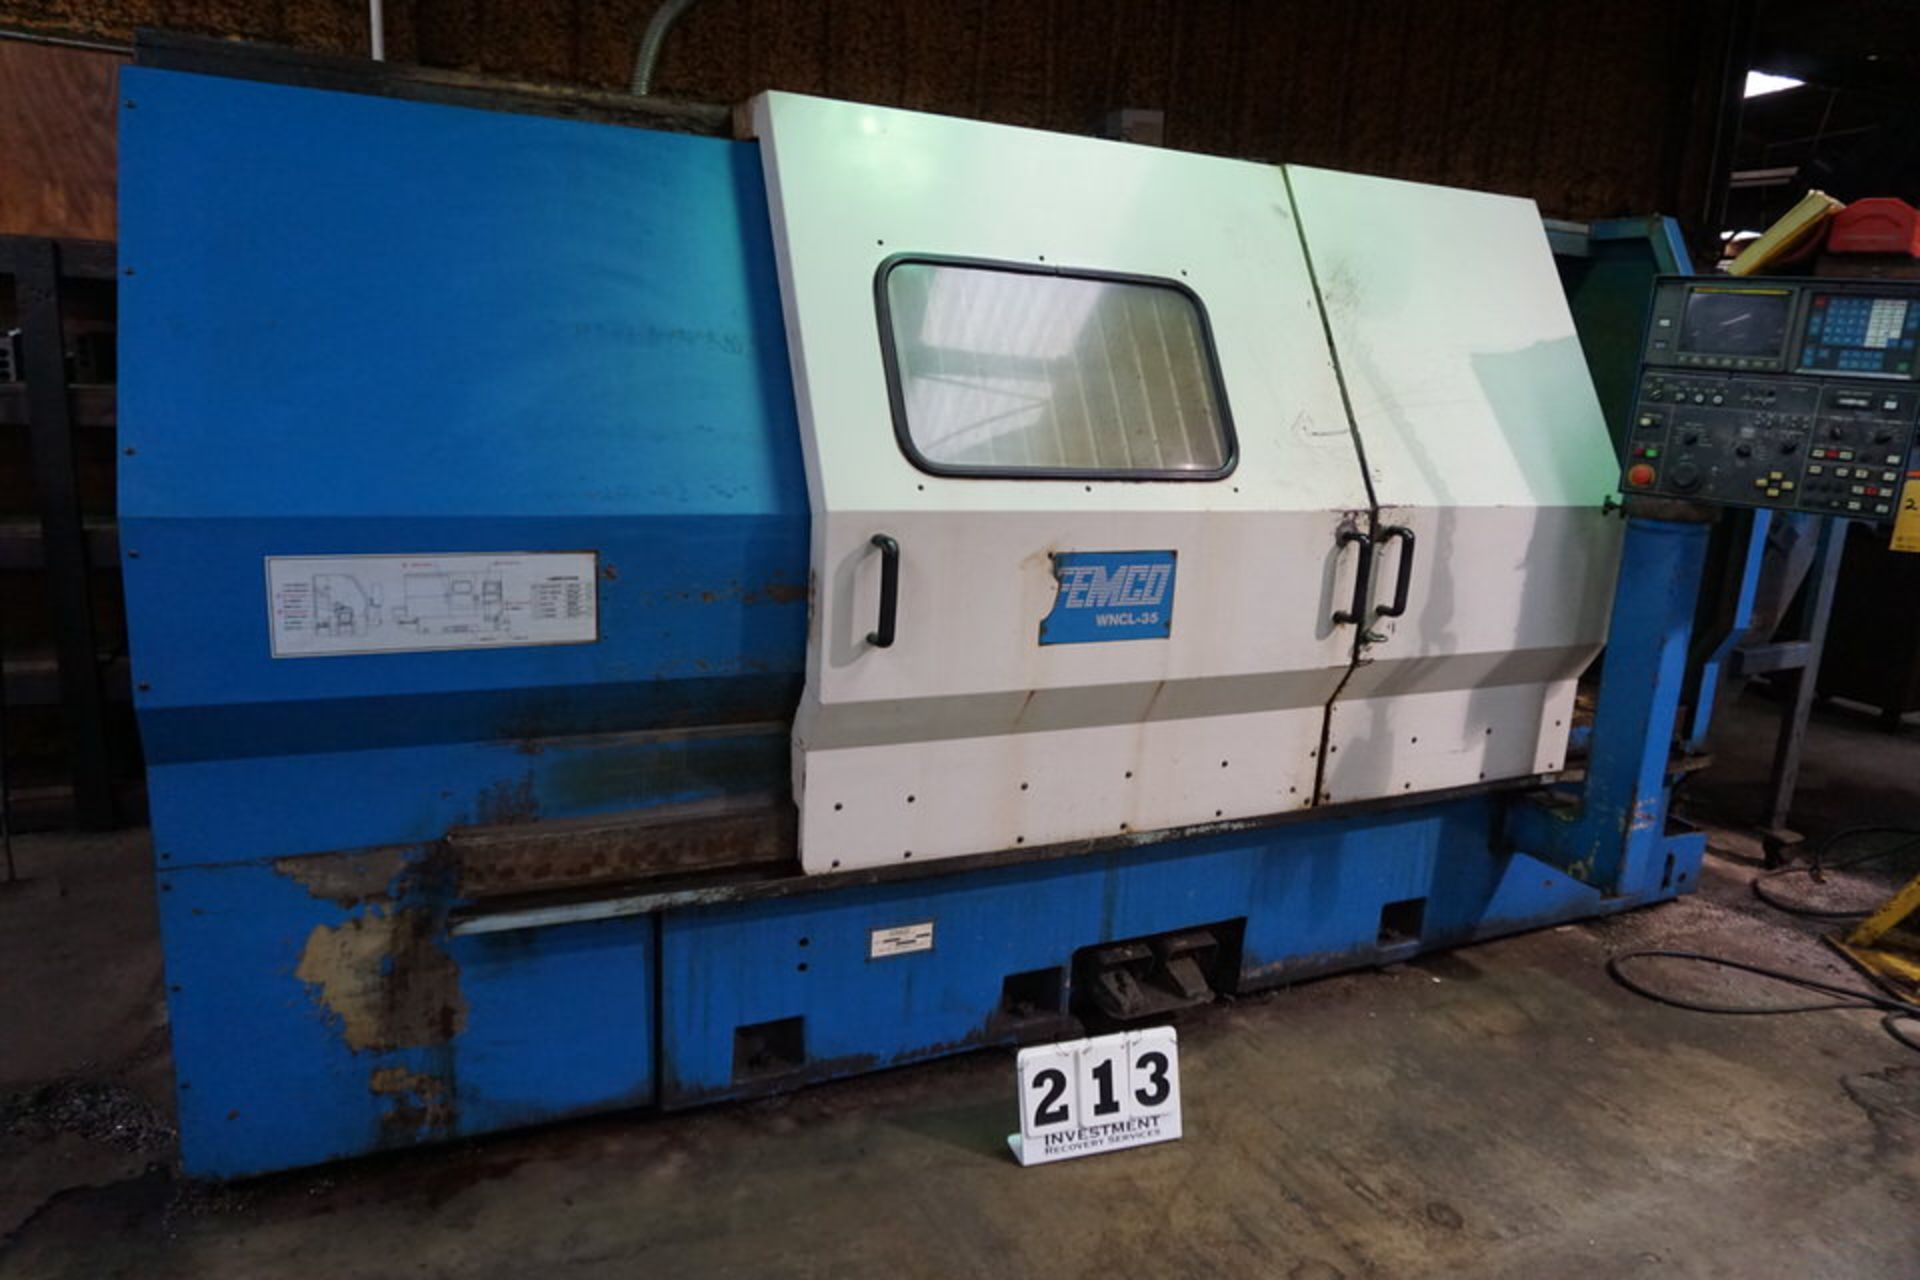 FEMCO WMCL35 CNC LATHE, DOM: 1997, FANUC O-T CTRL, 12 POSITION TURRENT, 12" 3 JAW CHUCK, CHIP